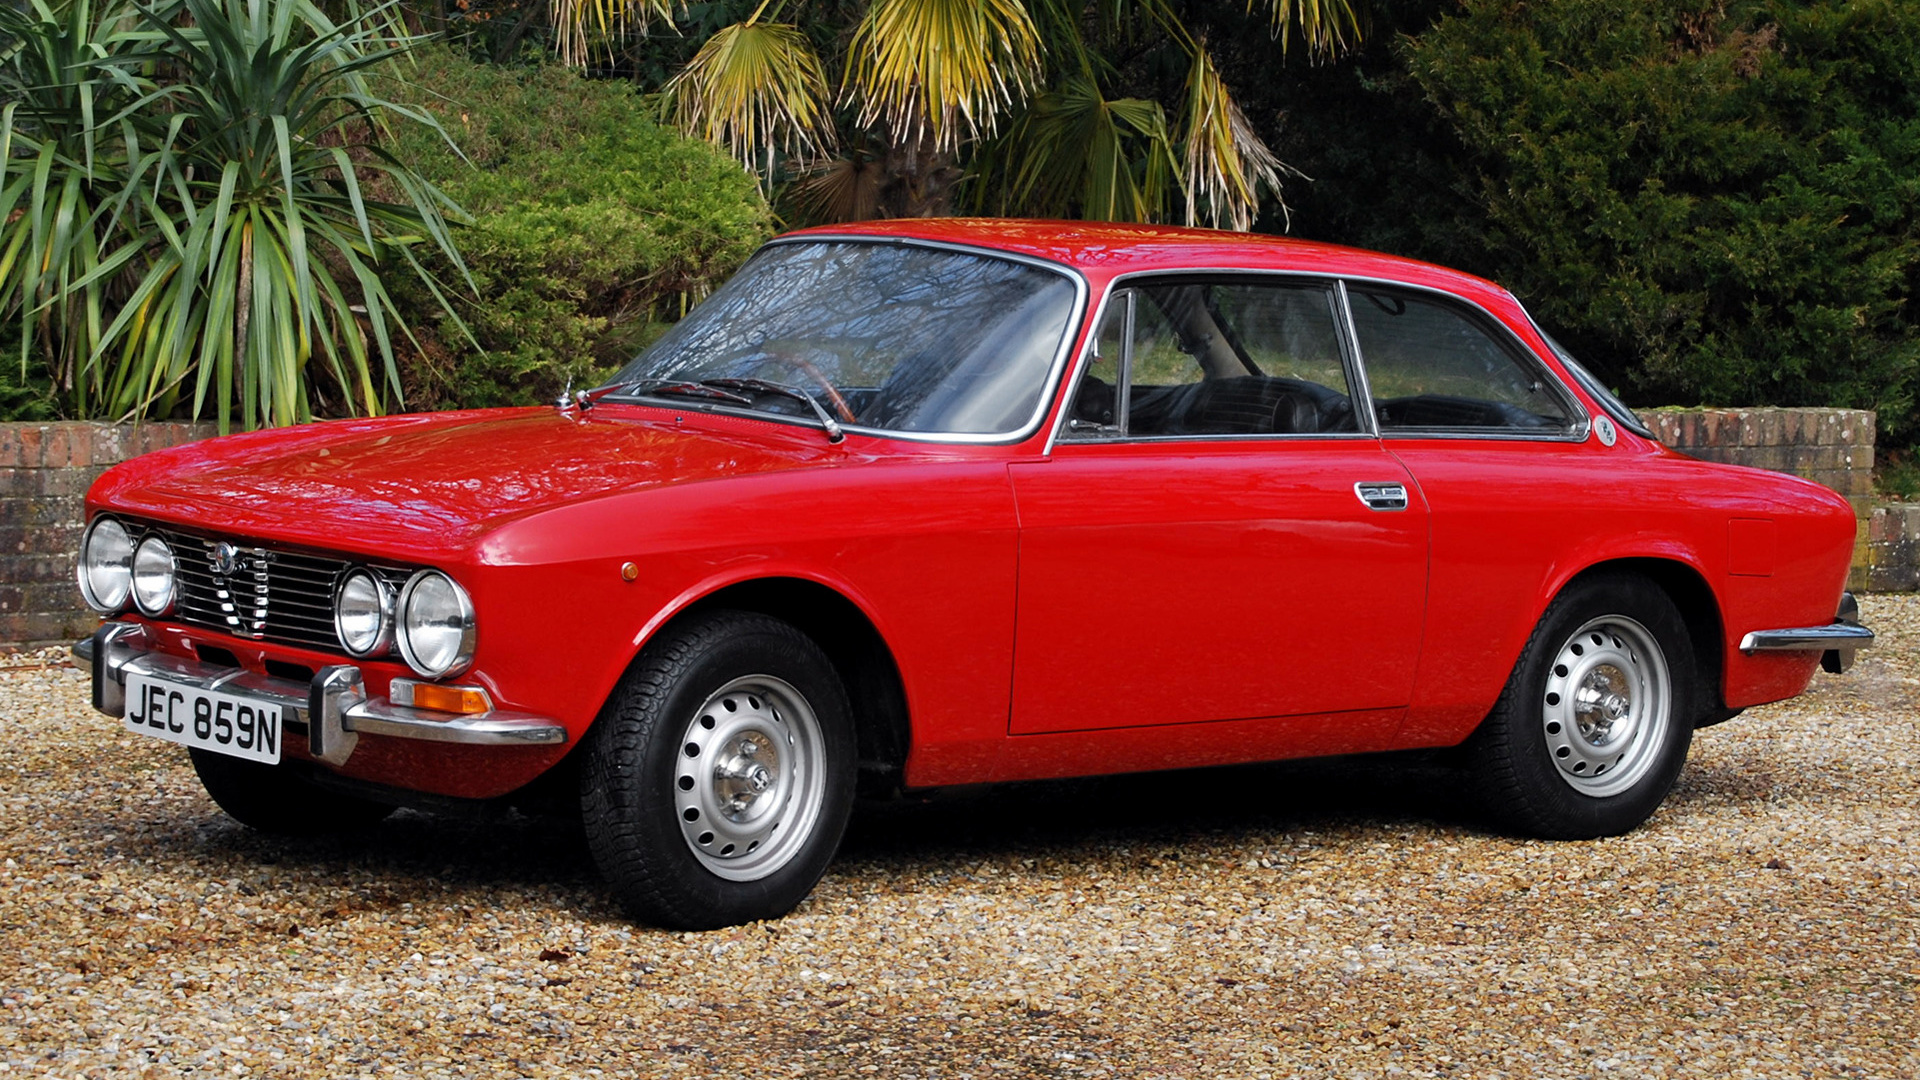 Alfa Romeo 2000 Gt Veloce Car Coupe Old Car Red Car 1920x1080